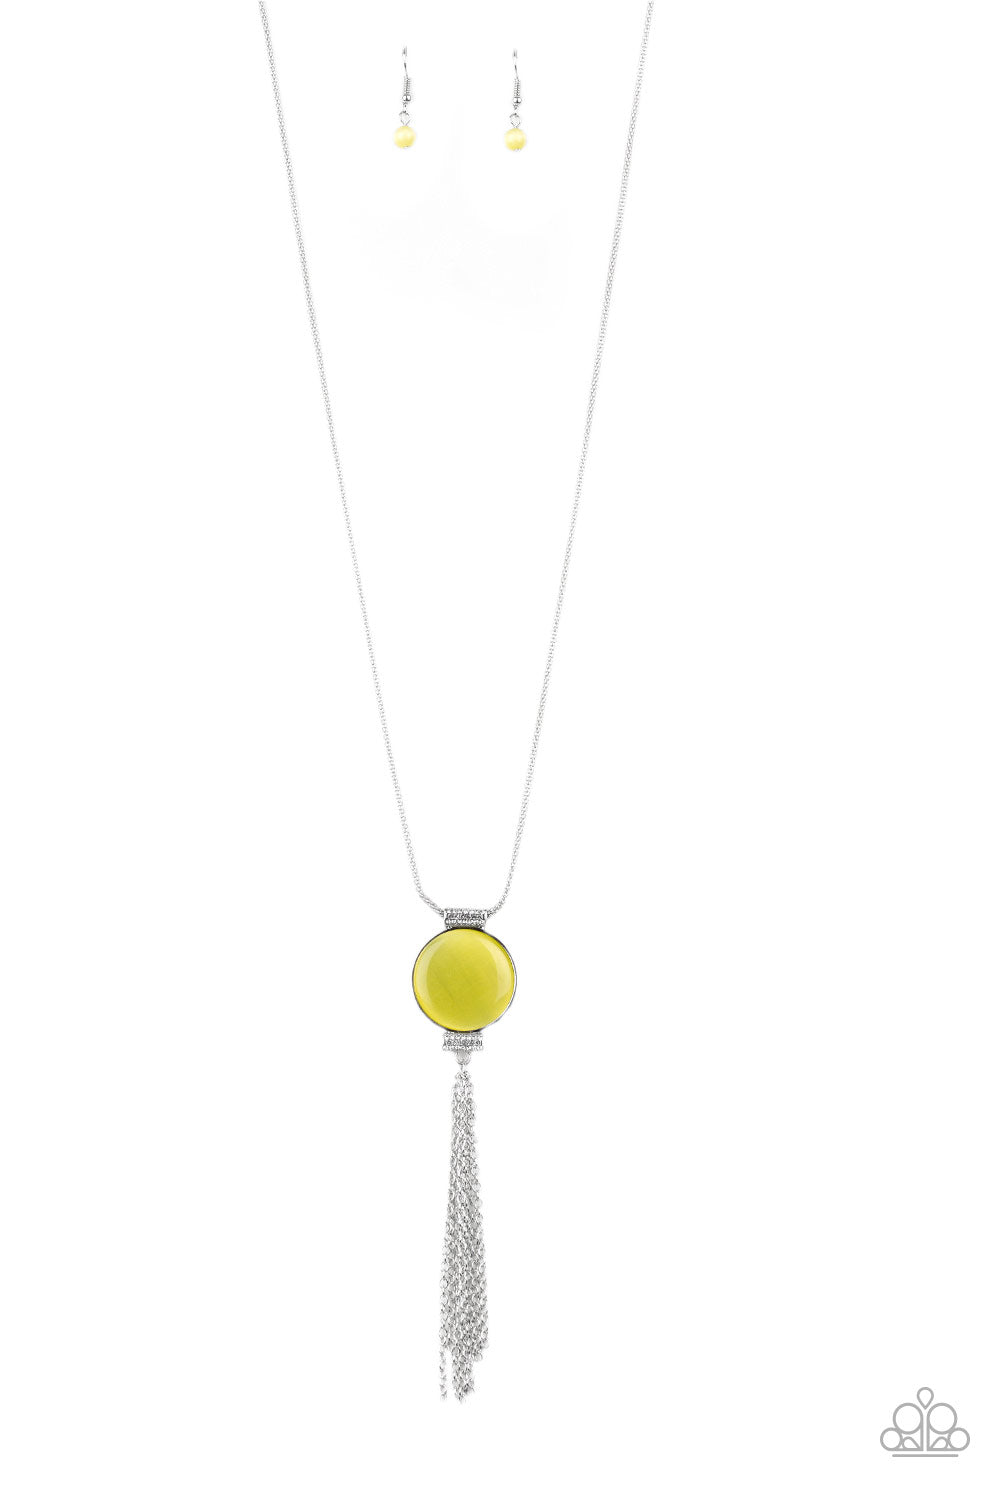 Happy As Can BEAM - Yellow Necklace